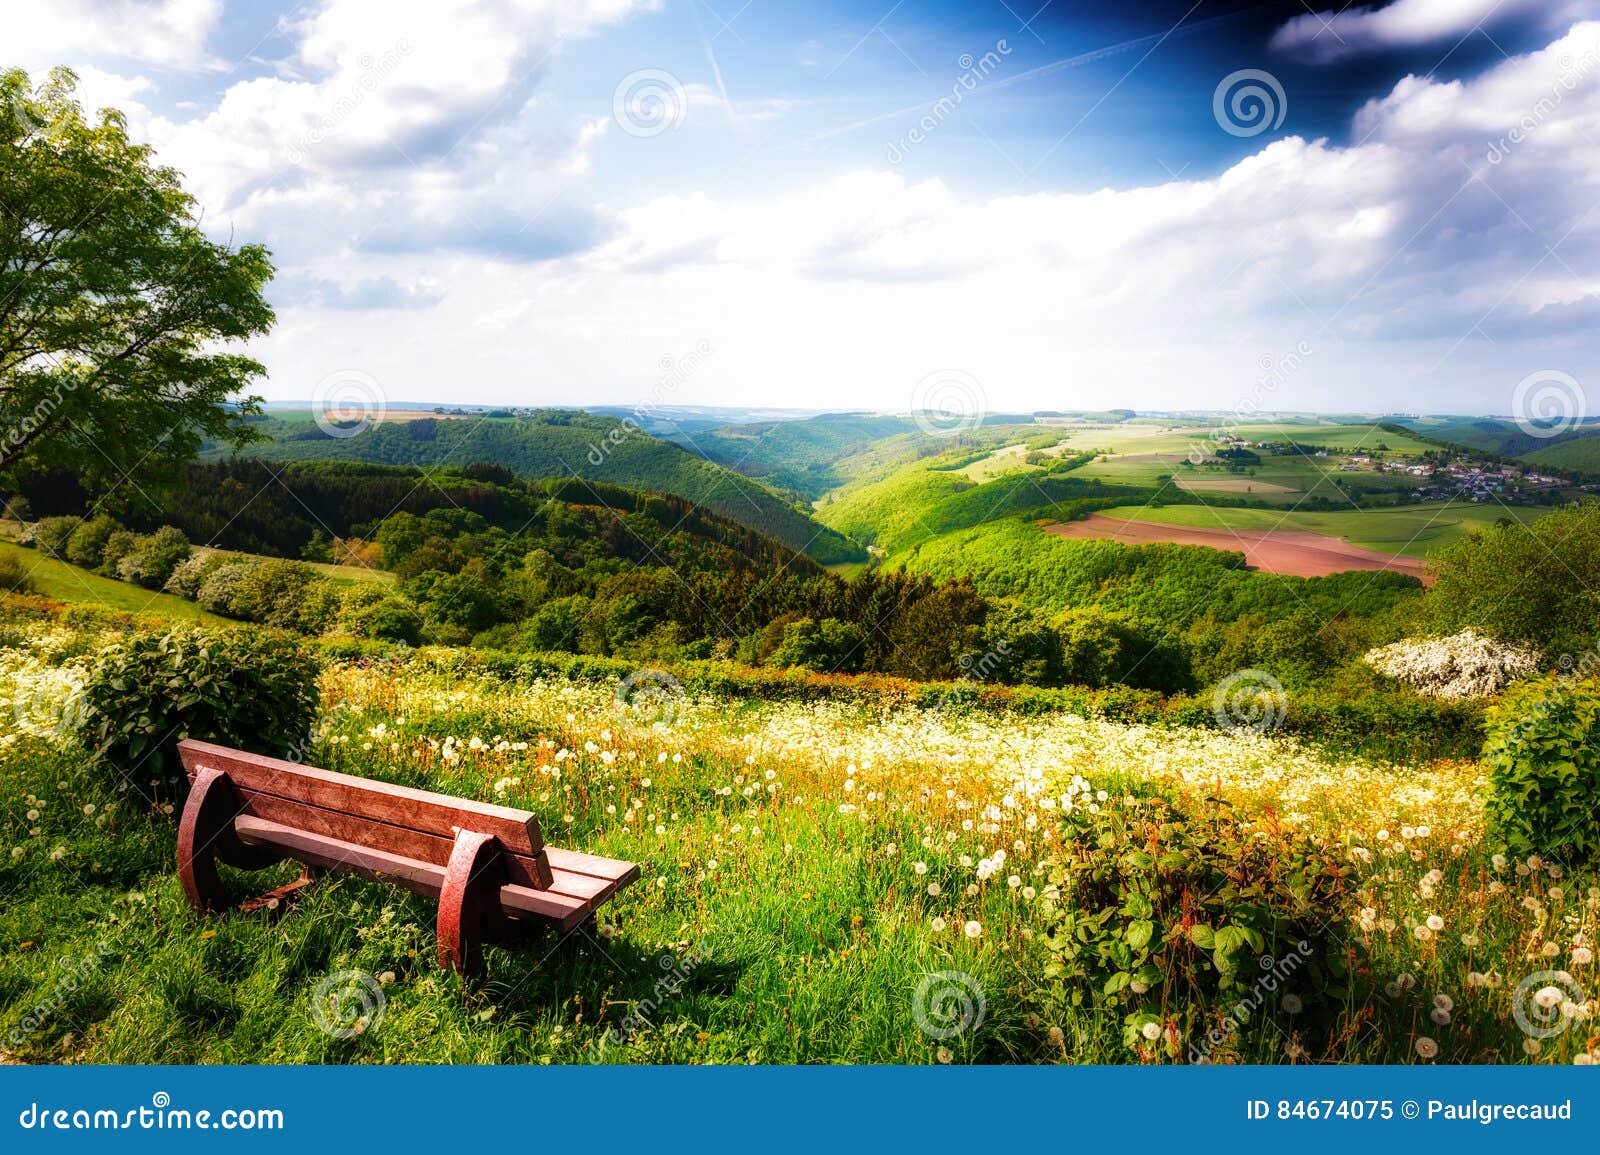 summer landscape with lonely wooden bench